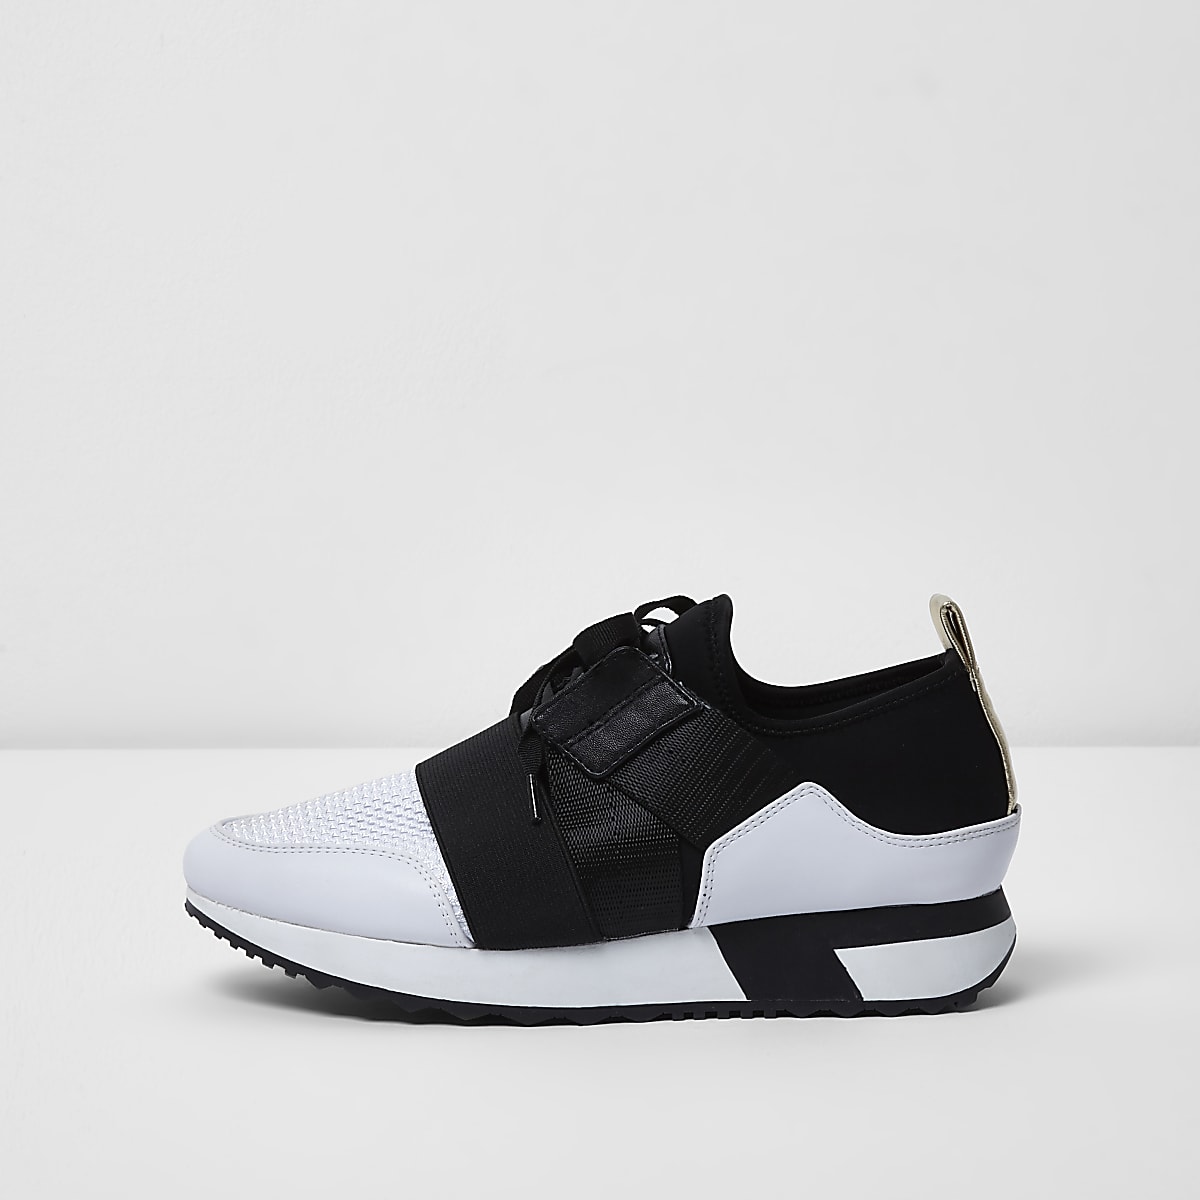 White and black elastic strap runner trainers - Shoes - Shoes & Boots ...